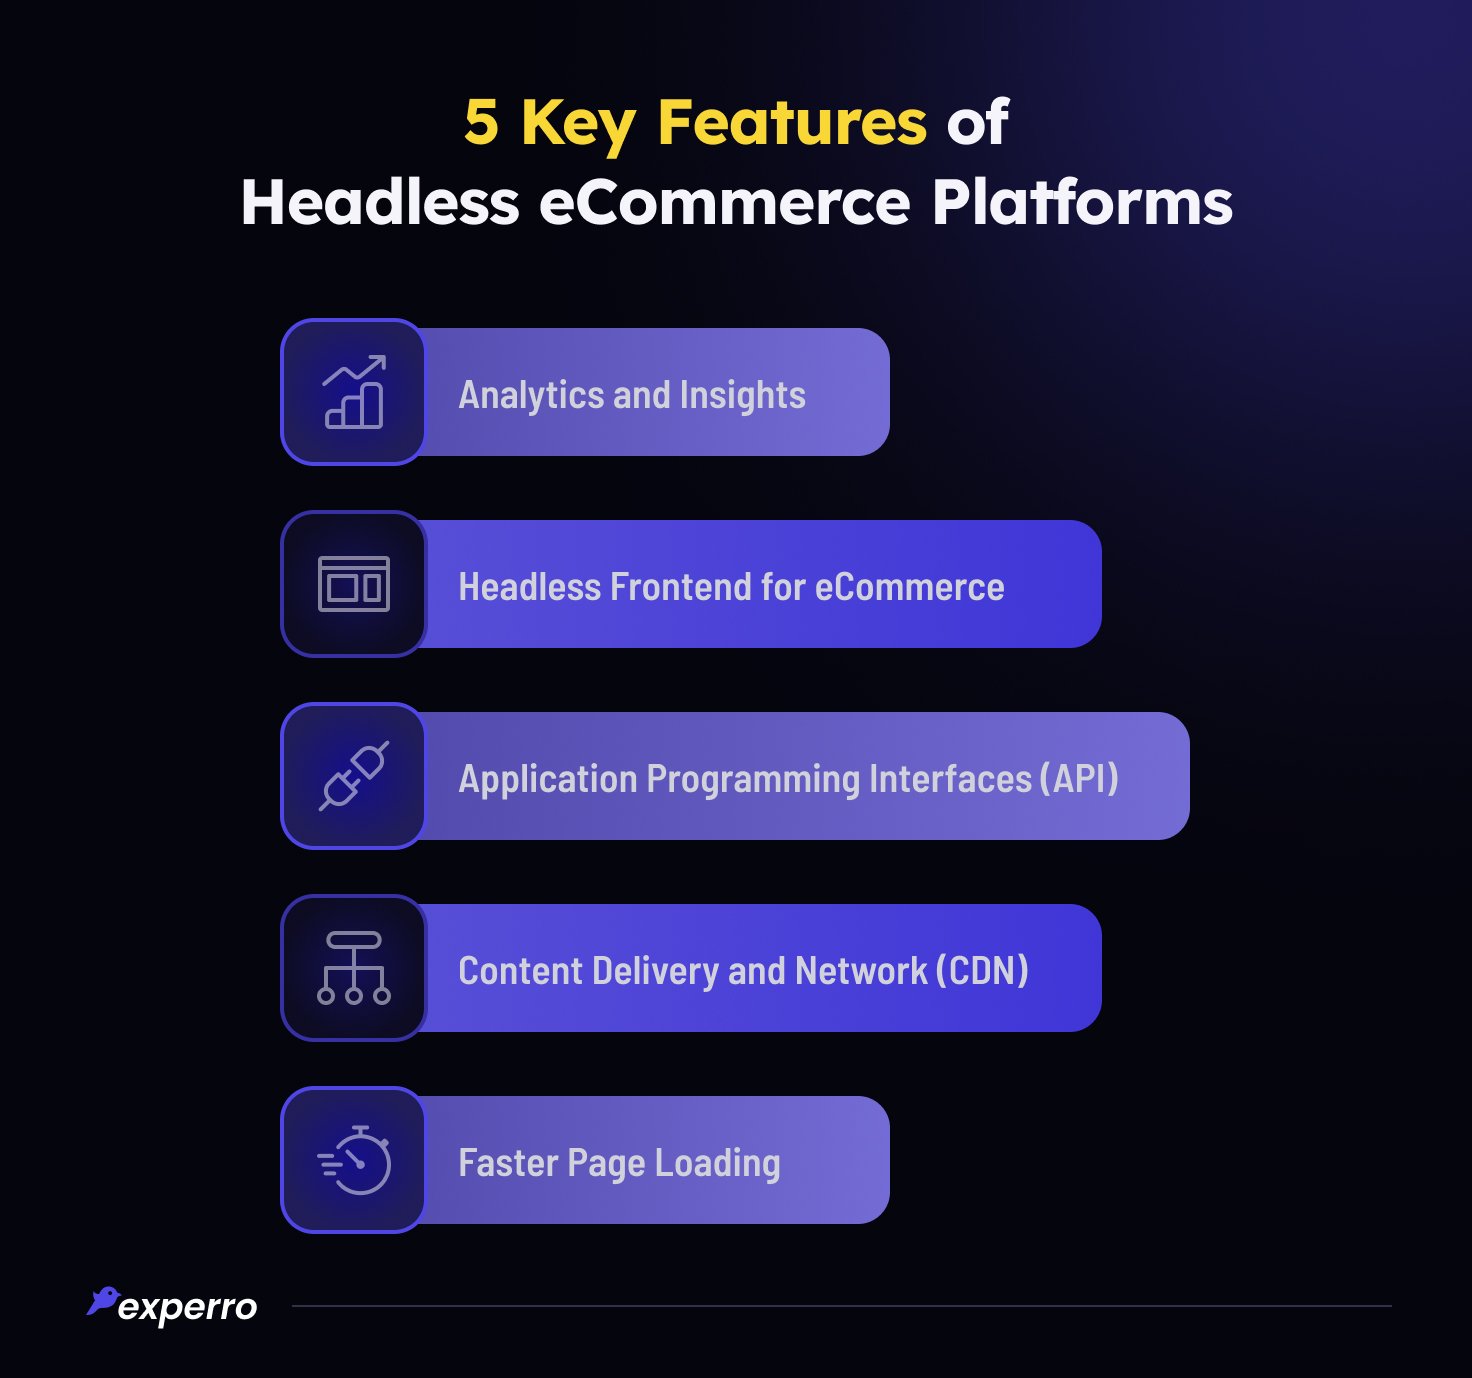 Key Features of Headless eCommerce Platforms